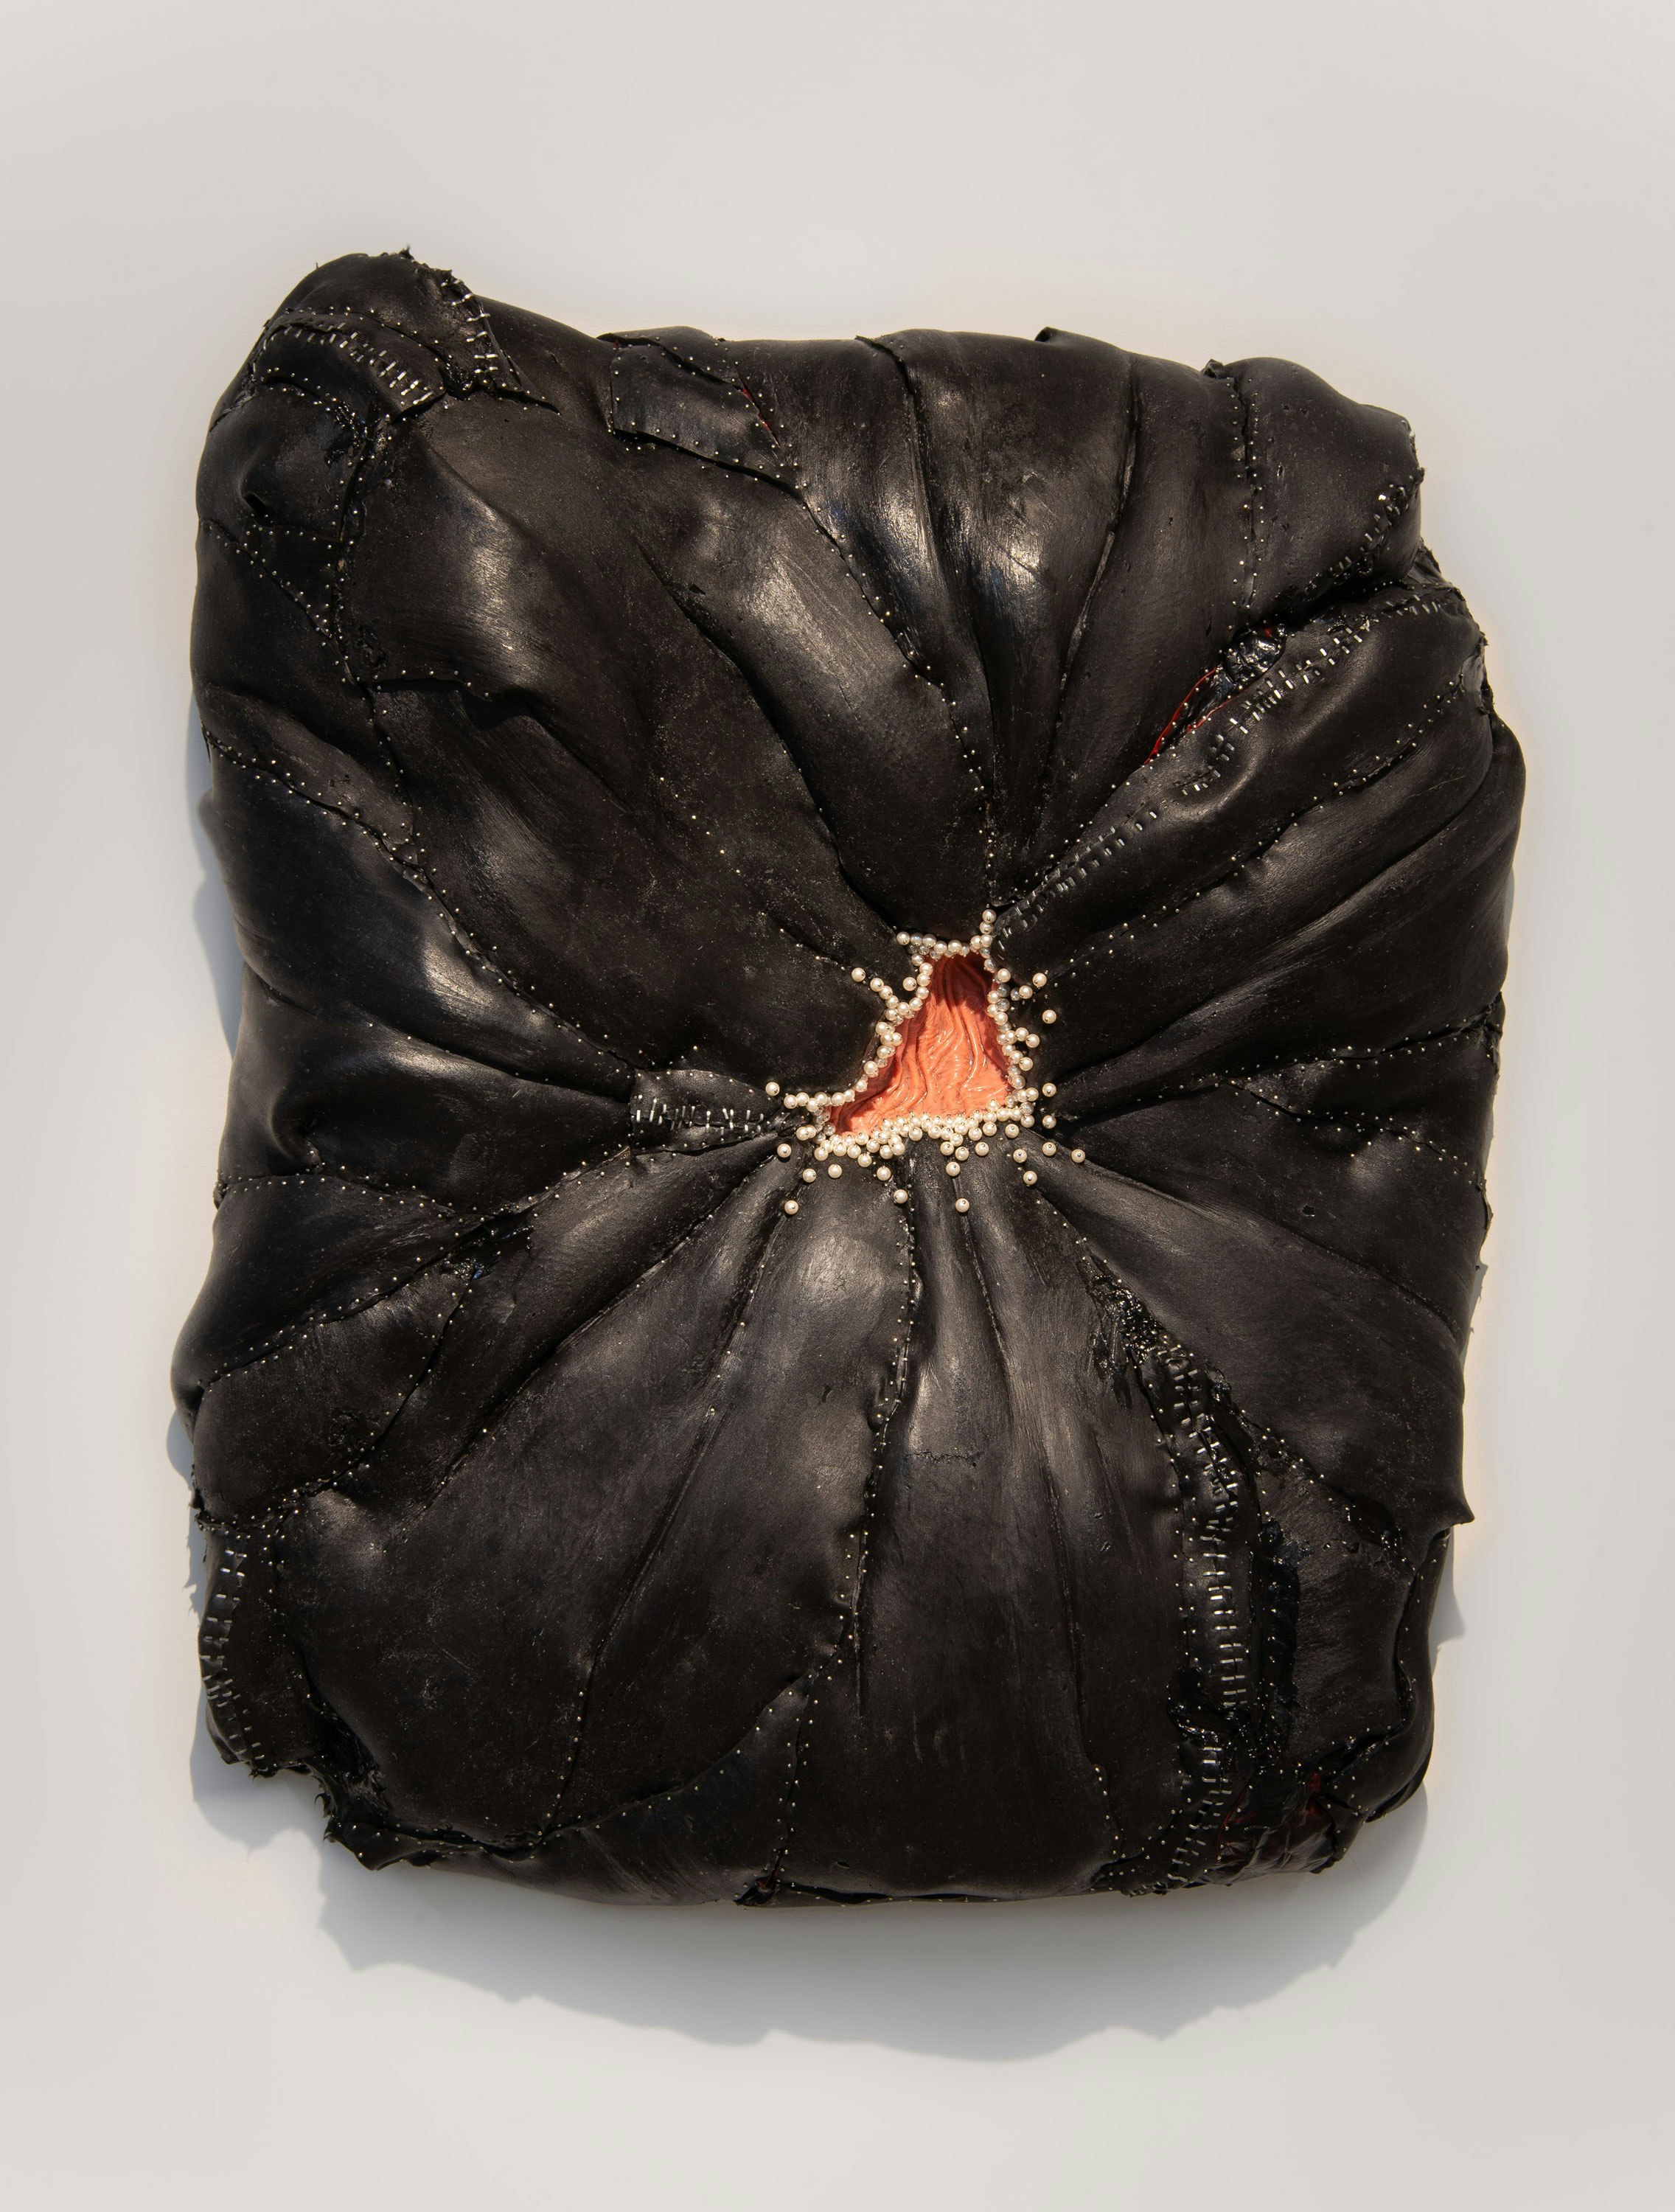 Doreen Garner, <em>After Her Tomb</em>, 2020. Urethane foam, silicone, steel pins, pearls, 27 x 23 1/2 x 7 1/4 inches. Courtesy the artist and JTT, New York.